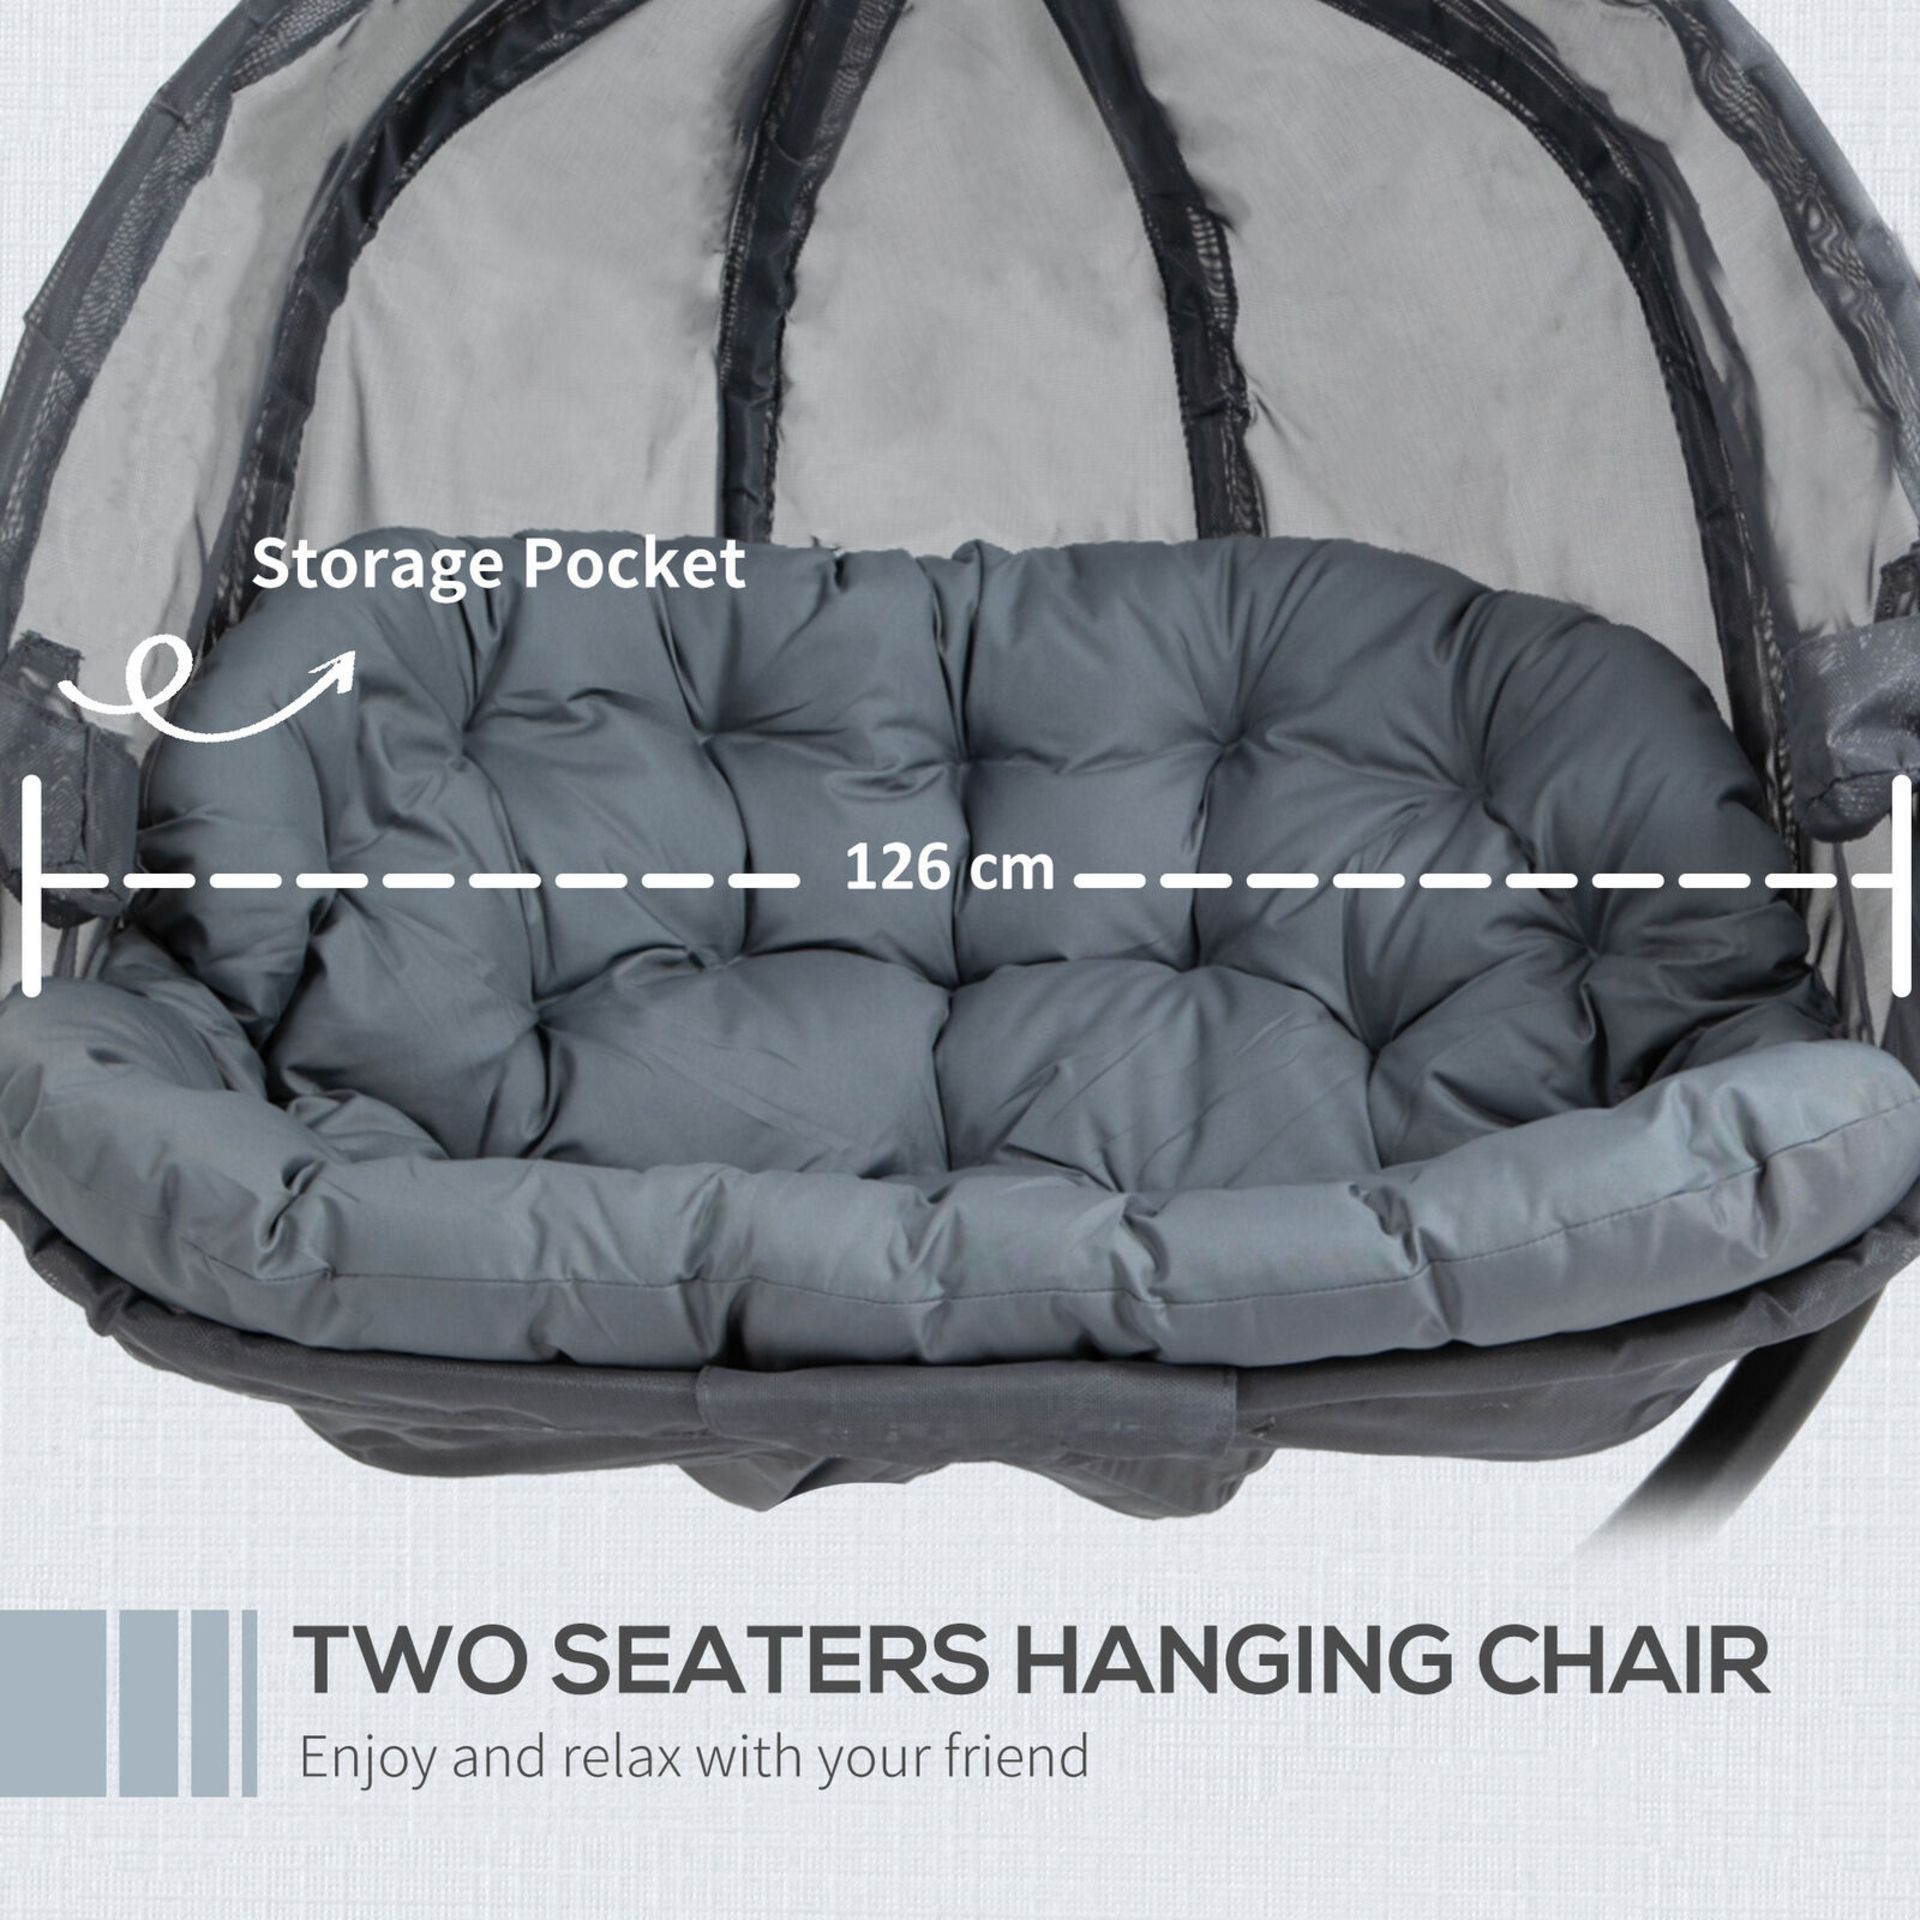 LUXURY 2 SEATERS SWING HAMMOCK CHAIR WITH CUSHIONS - Image 4 of 10